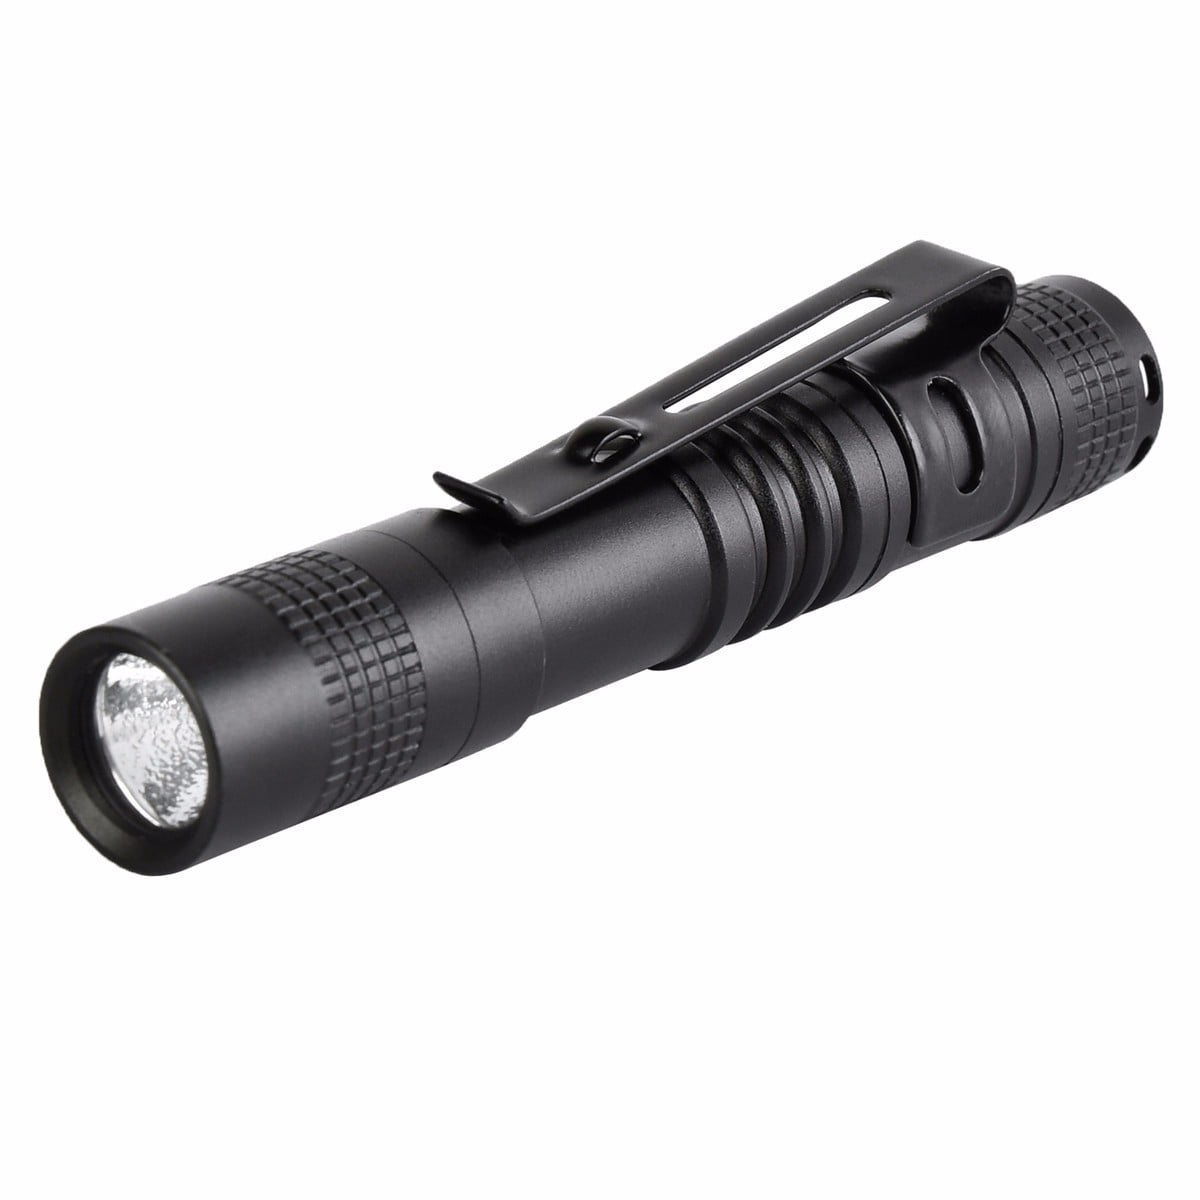 Mini 3000LM LED Flashlight Portable Pen Clip Torch Light For Hiking Camping AAA